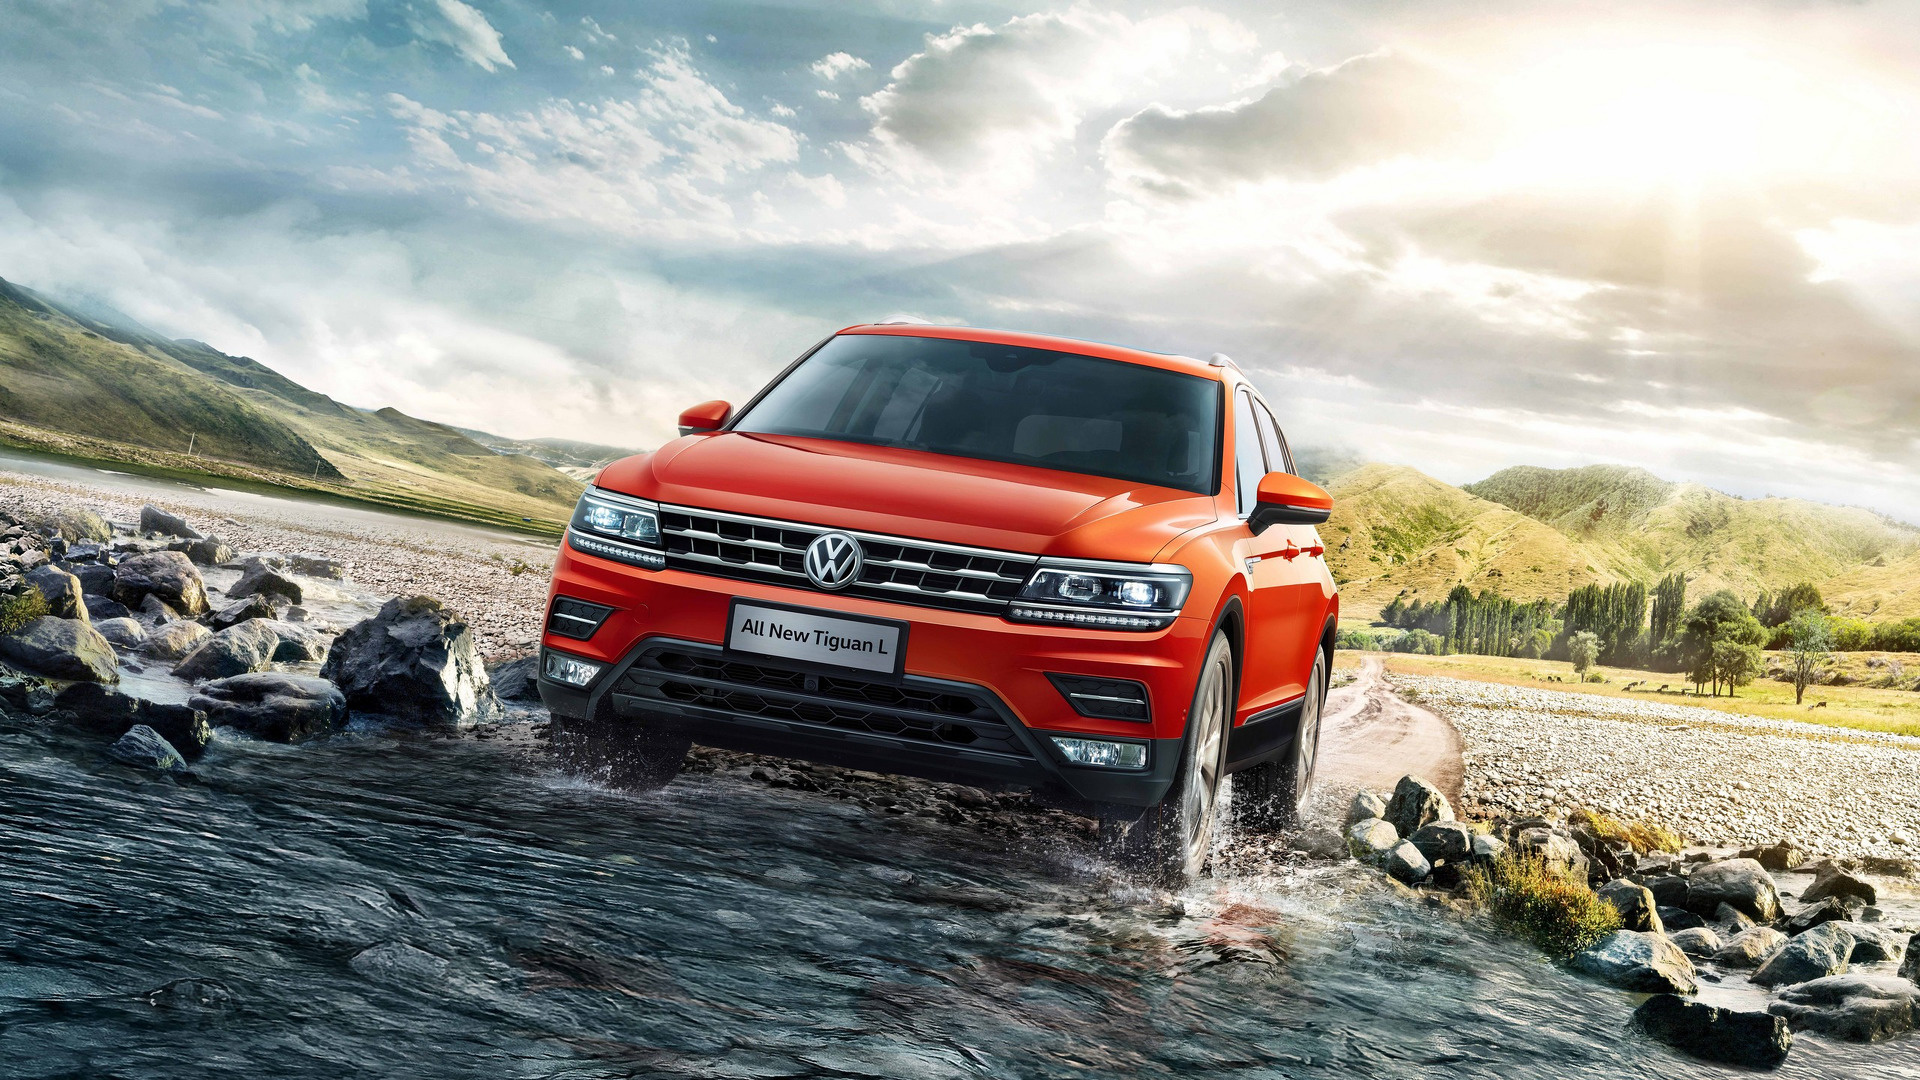 Volkswagen Tiguan, Official images, Allspace release, SUV excellence, 1920x1080 Full HD Desktop